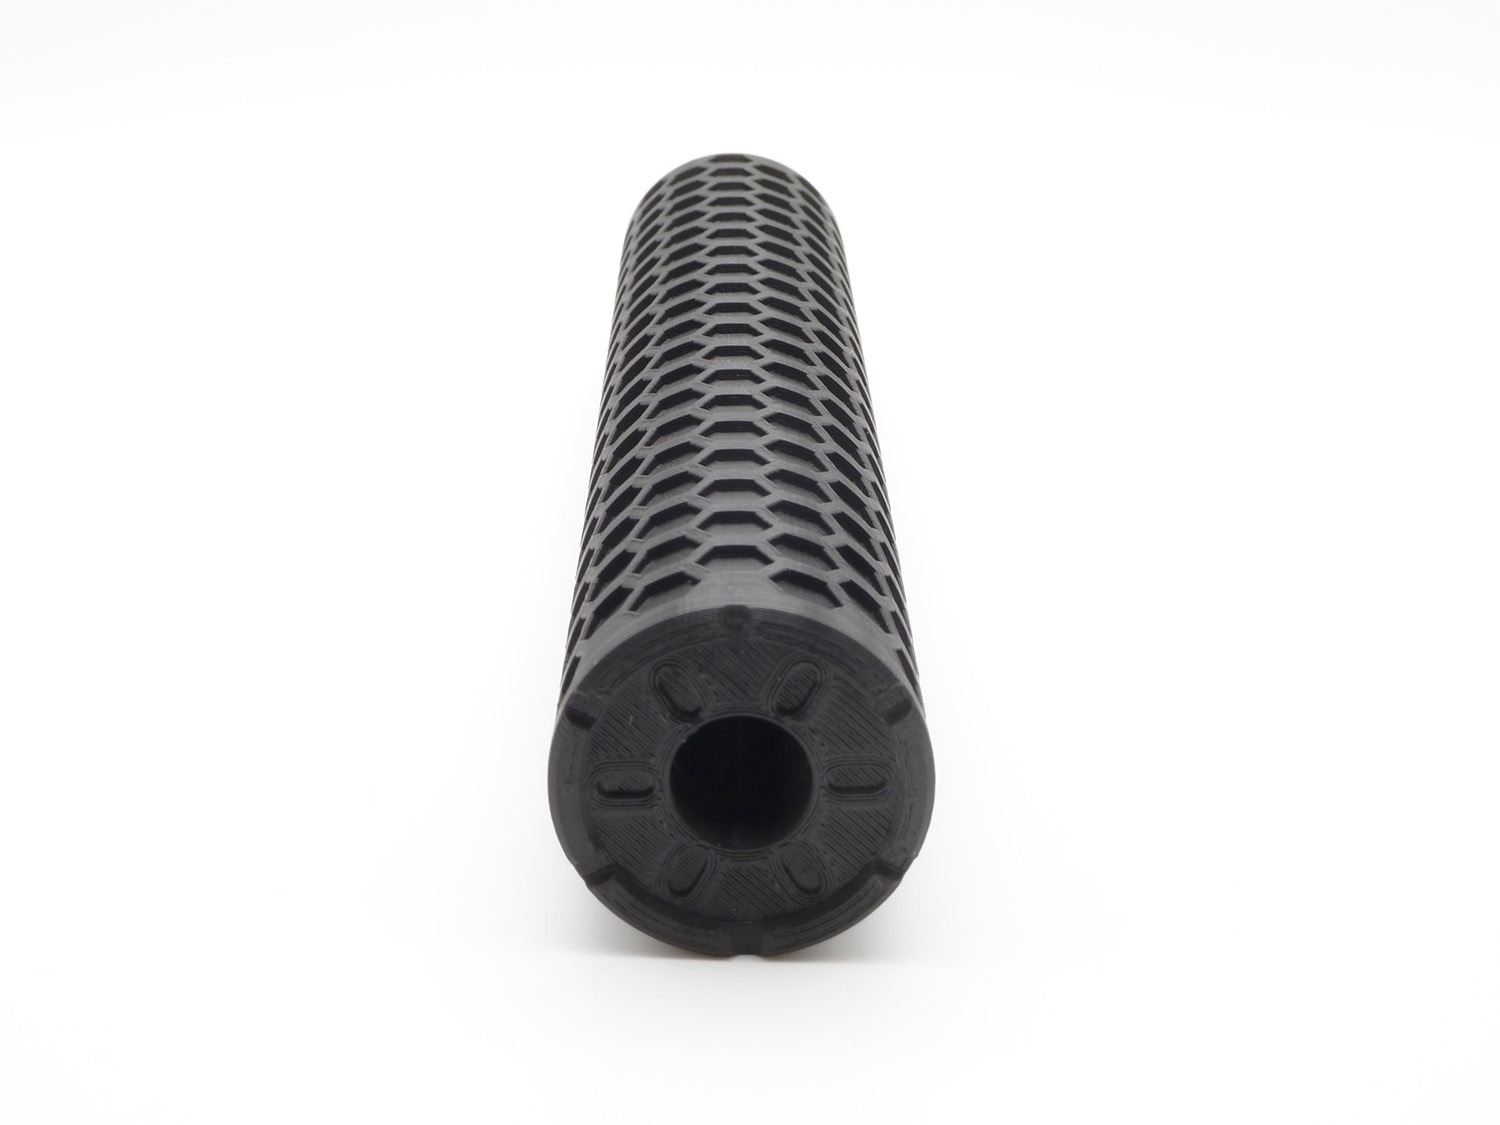 Hex-Pattern Cylindrical Silencer, muzzle view